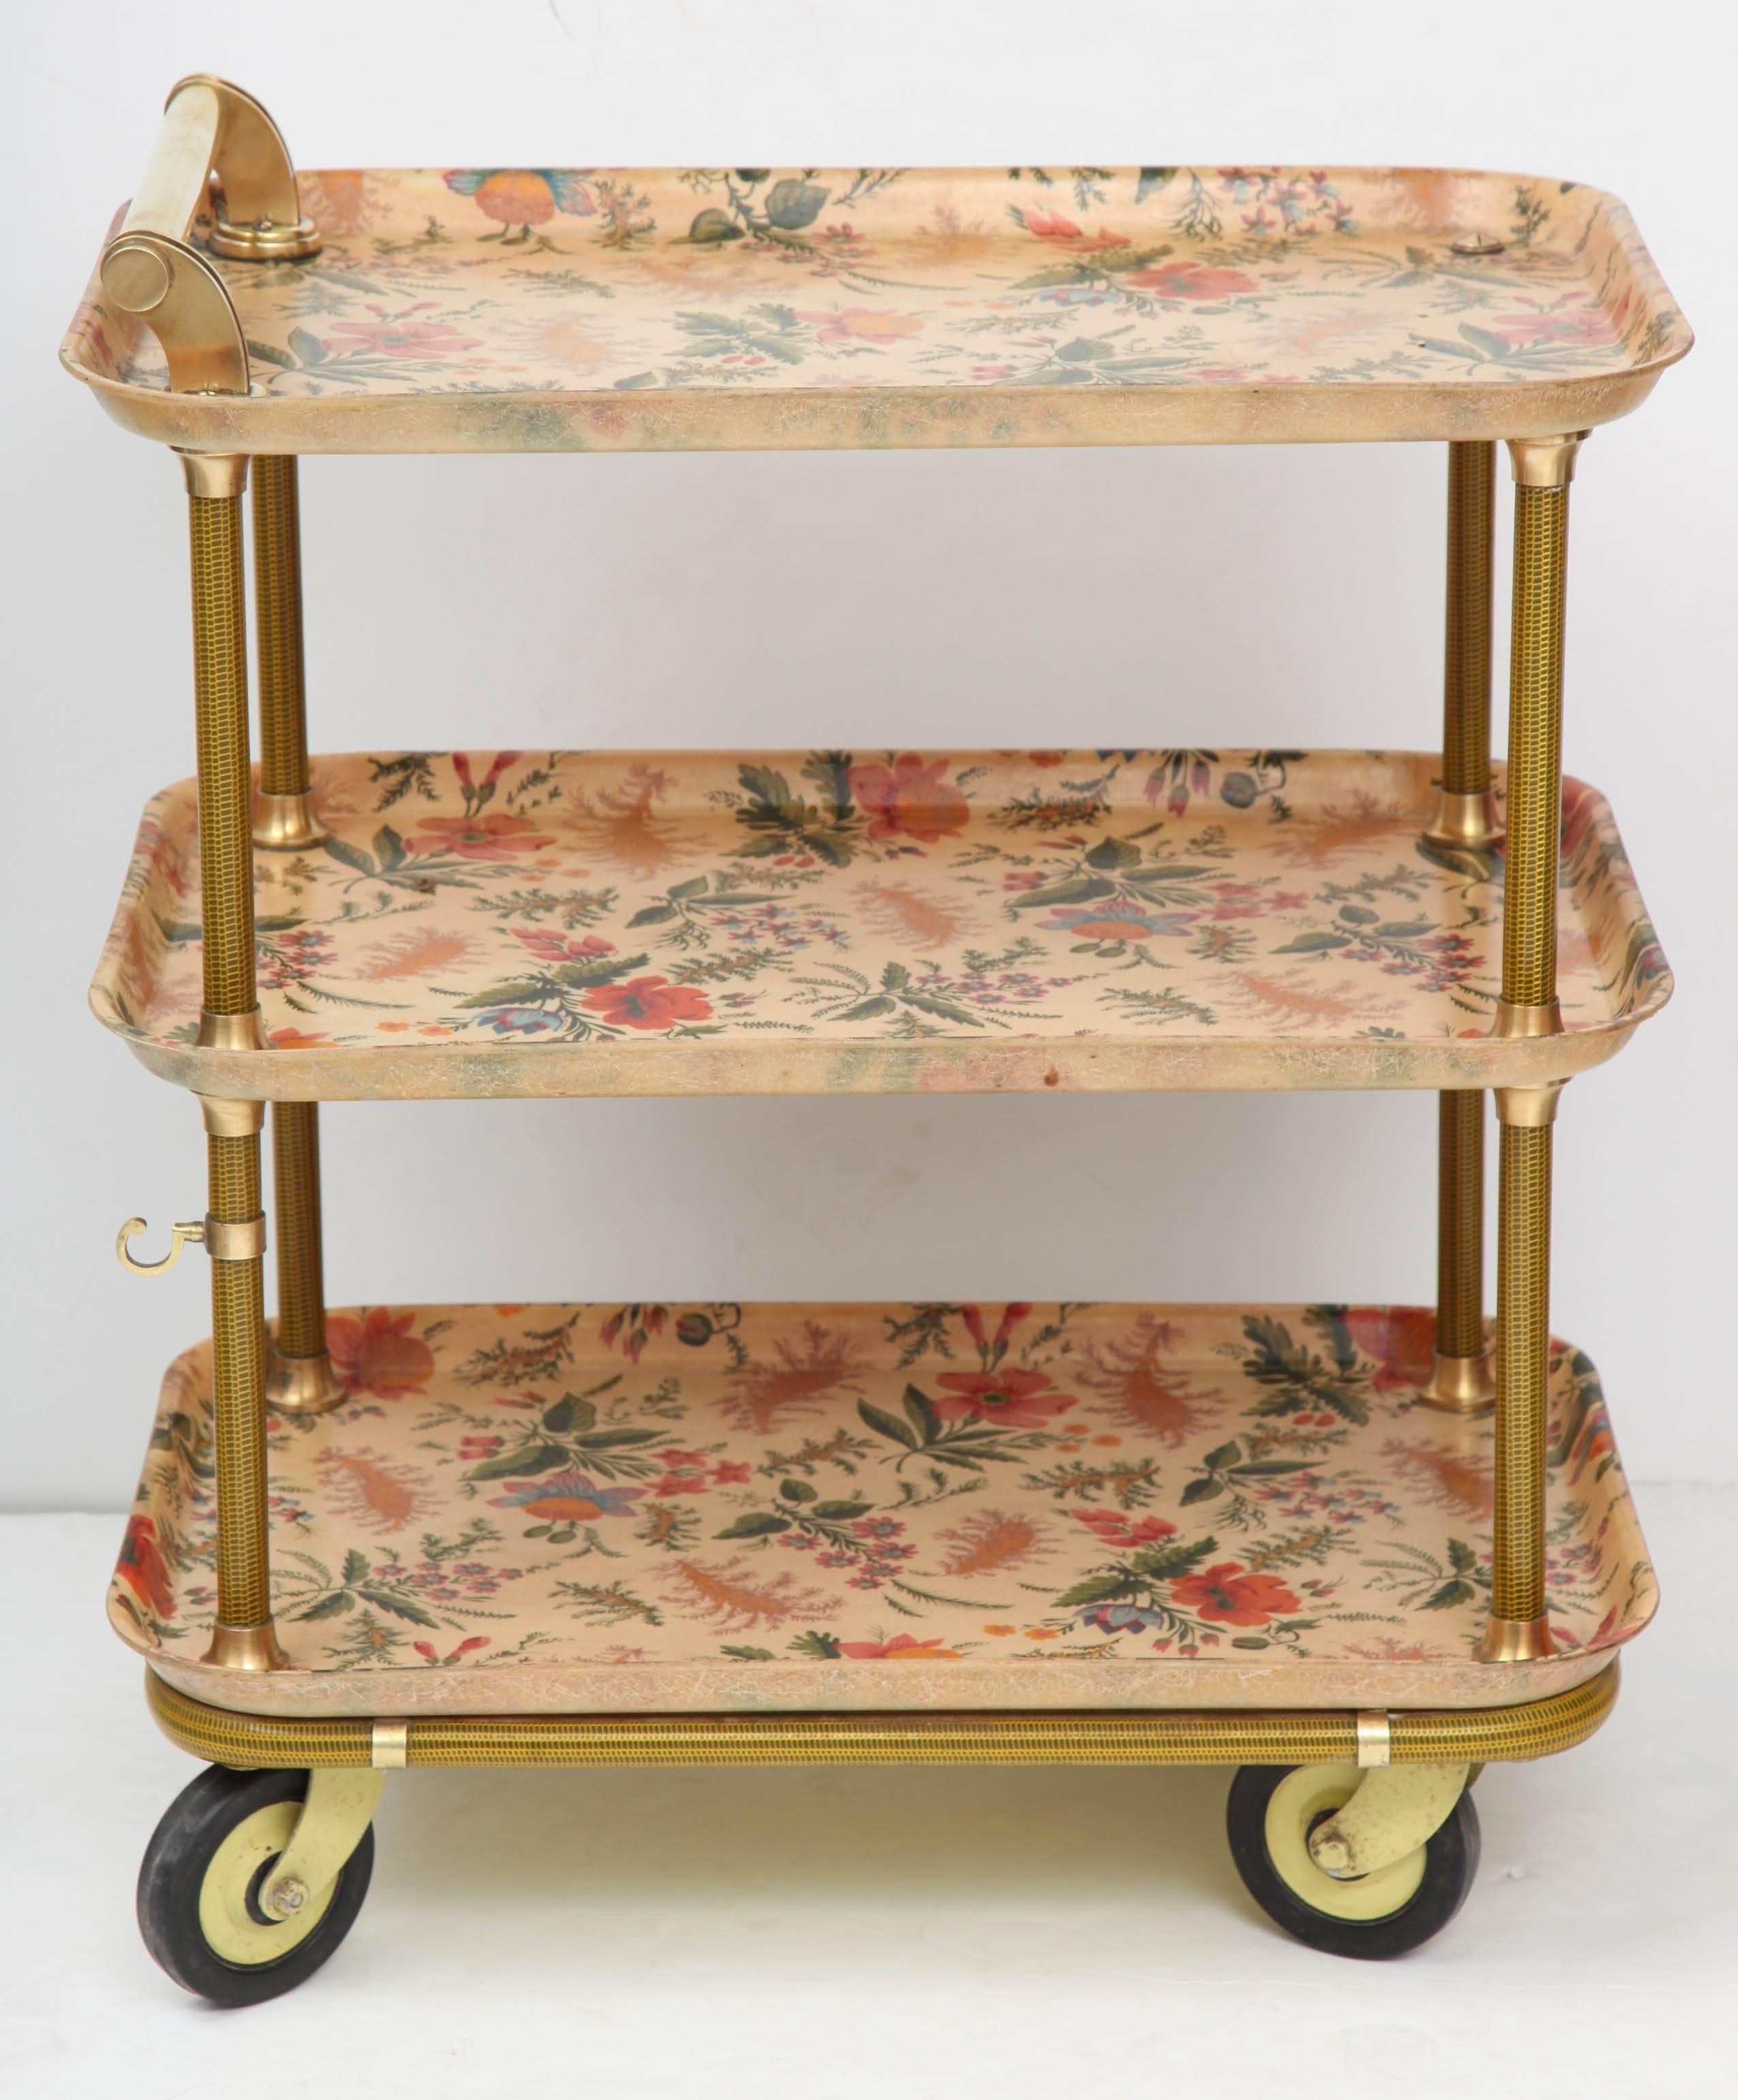 A three-tier serving cart with flowered fabric laminated into fiberglass trays, supported on a frame of woven gold-colored fiberglass rods with polished brass mounts, French, late 1950s. Top serving surface 25